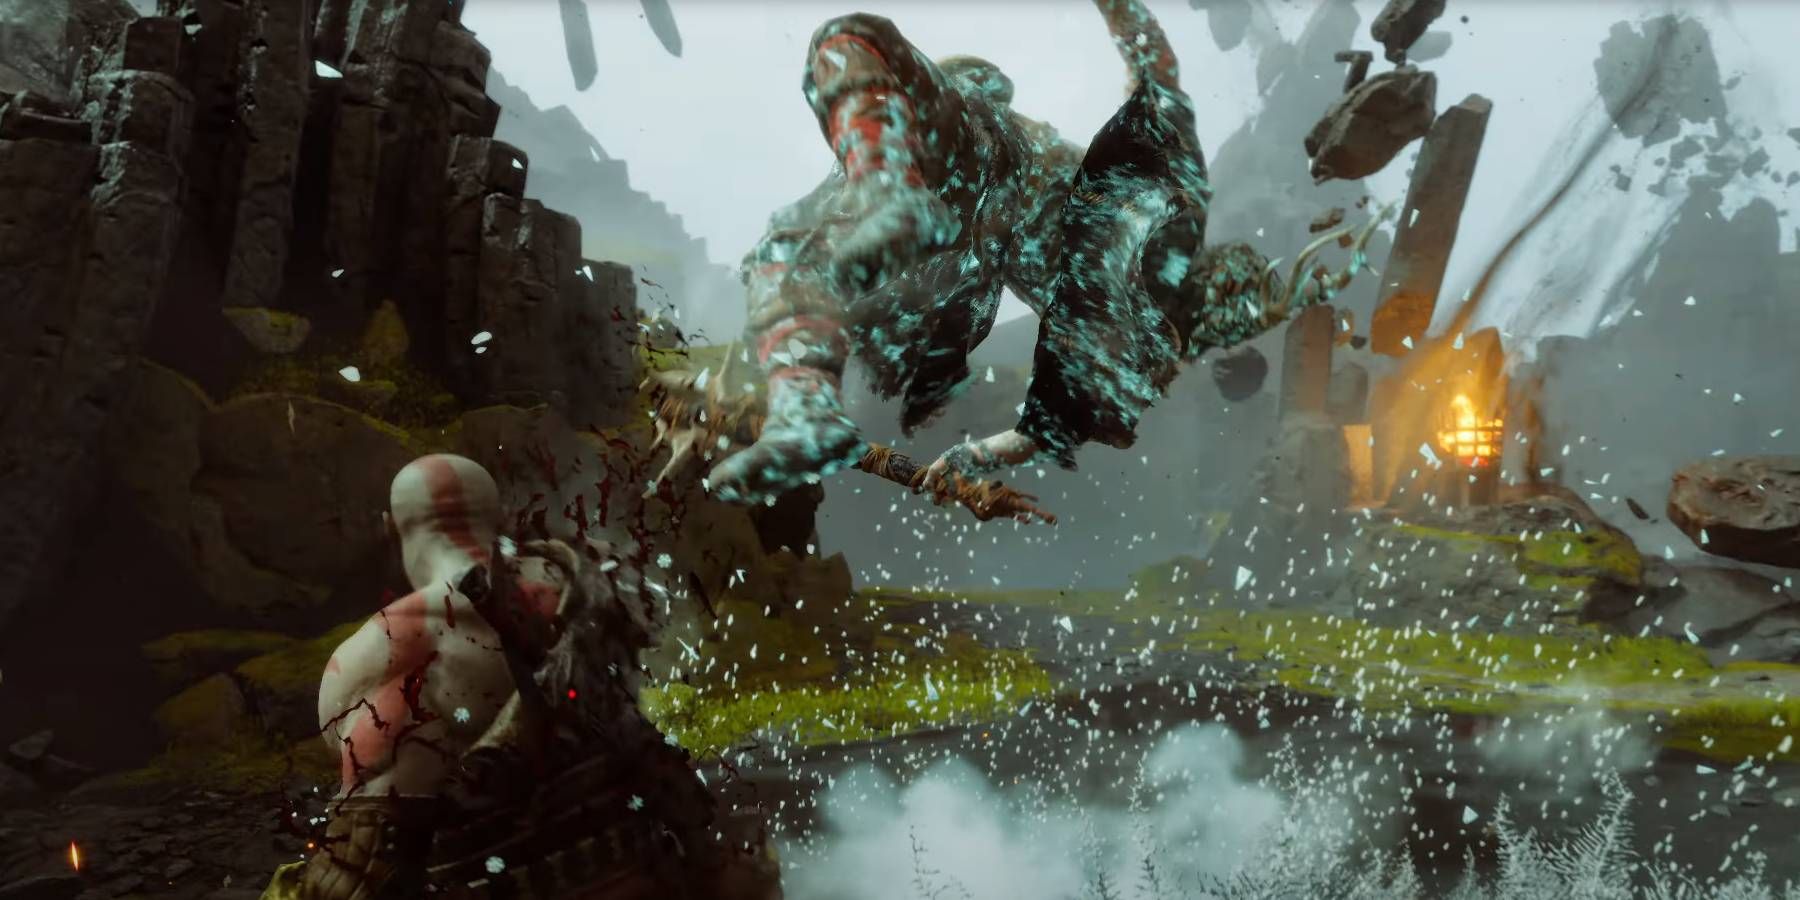 God of War Ragnarok Valhalla Kratos Using Leviathan Axe to Launch Enemy into the Air